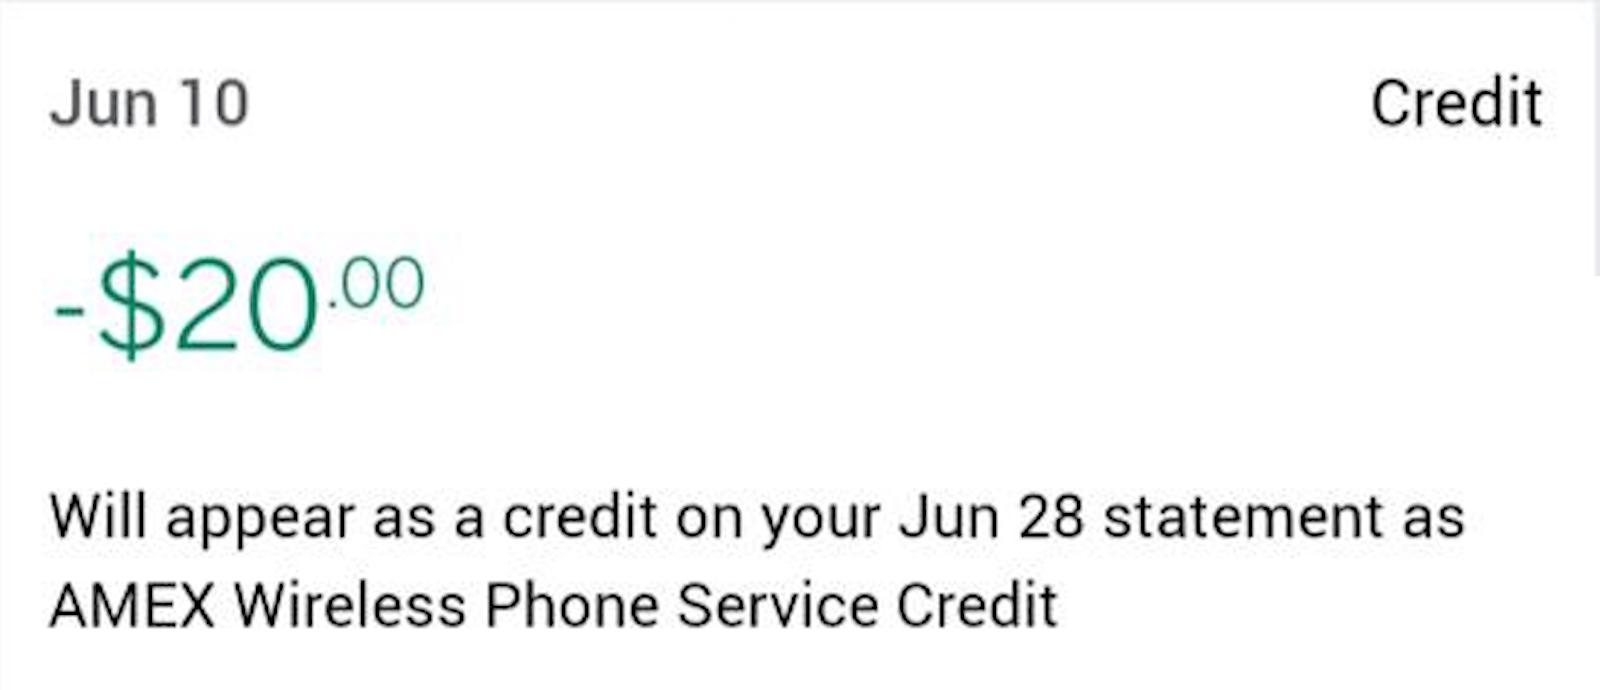 Automatic credit for Amex wireless credit with Google Fi.